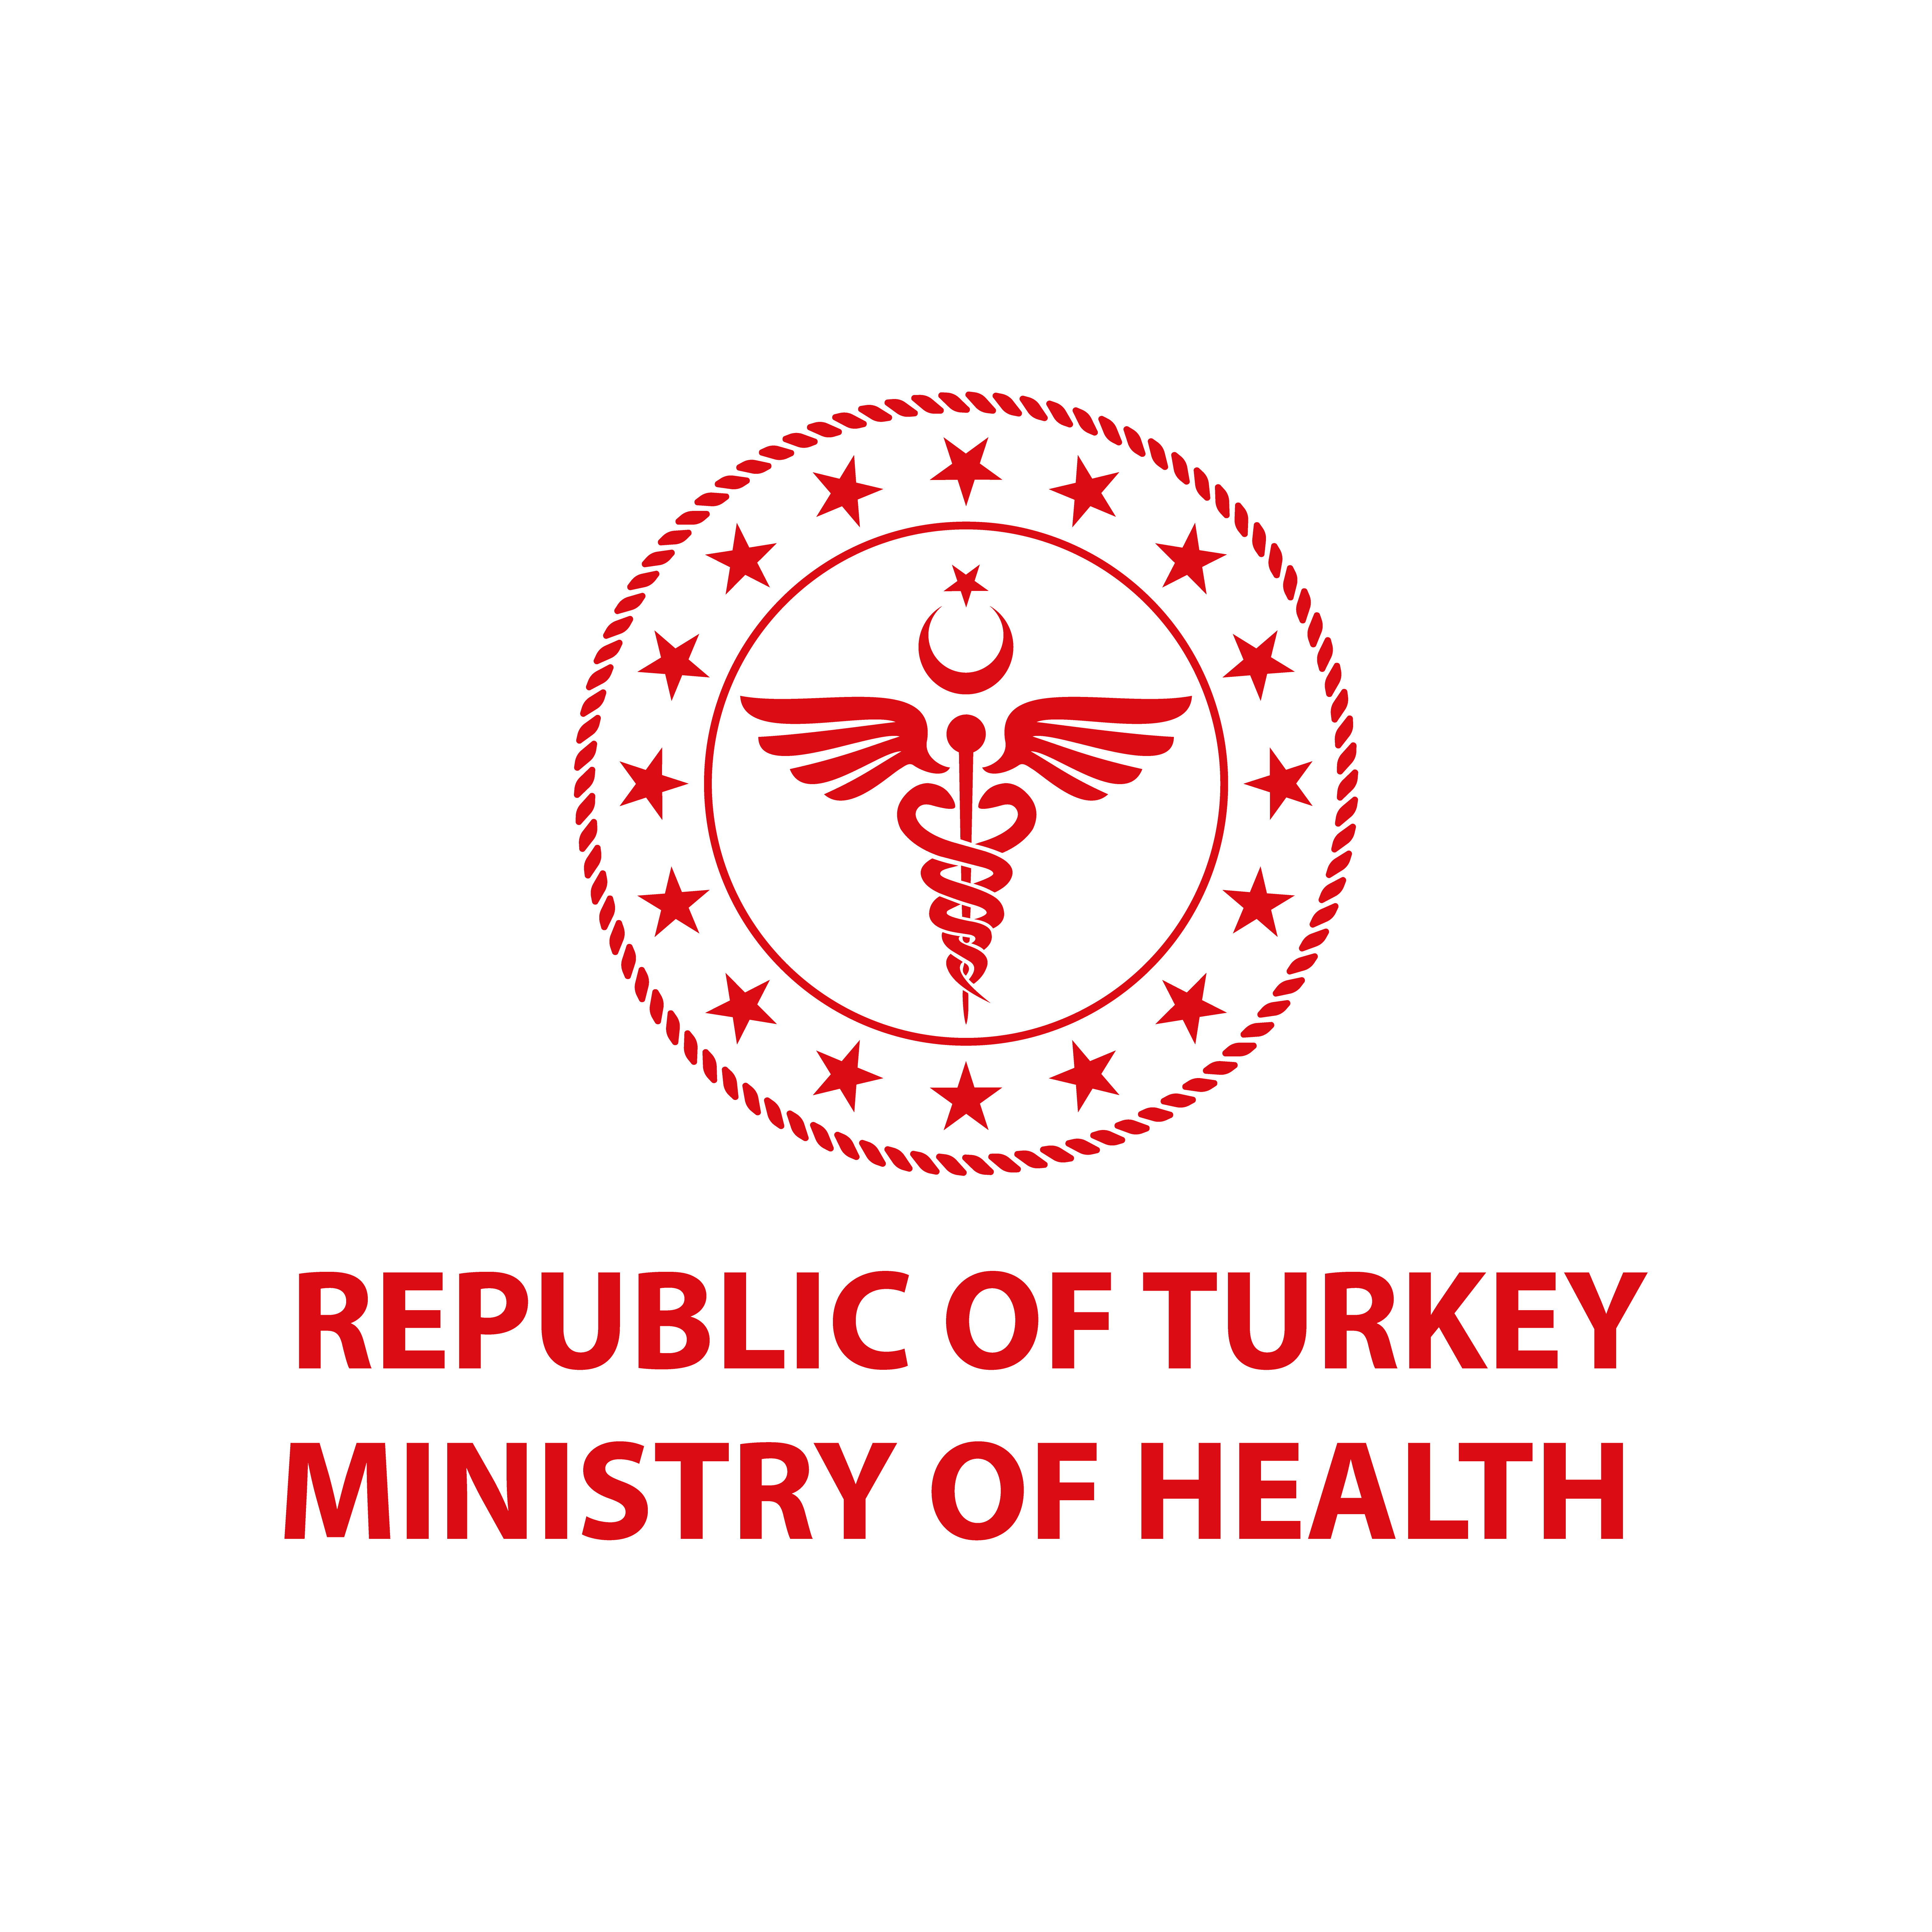 republic of turkey ministry of health logo png #41026